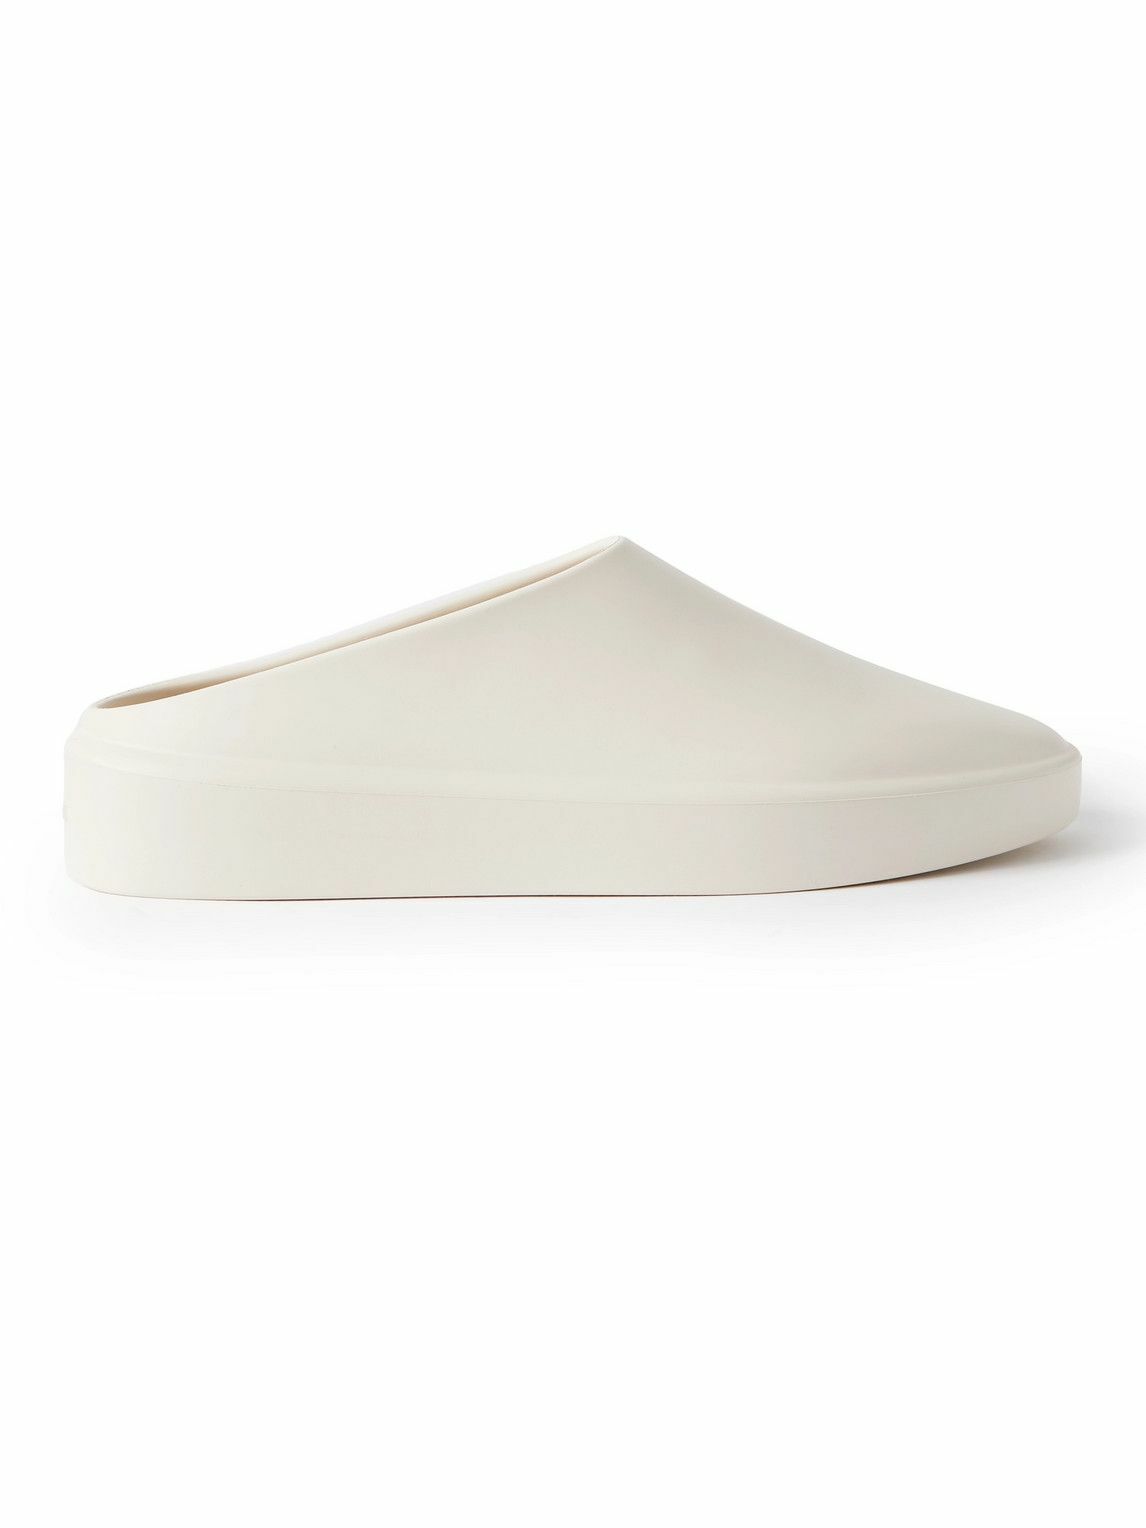 Fear of God - The California XL EXTRALIGHT® Slip-On Sneakers - White ...